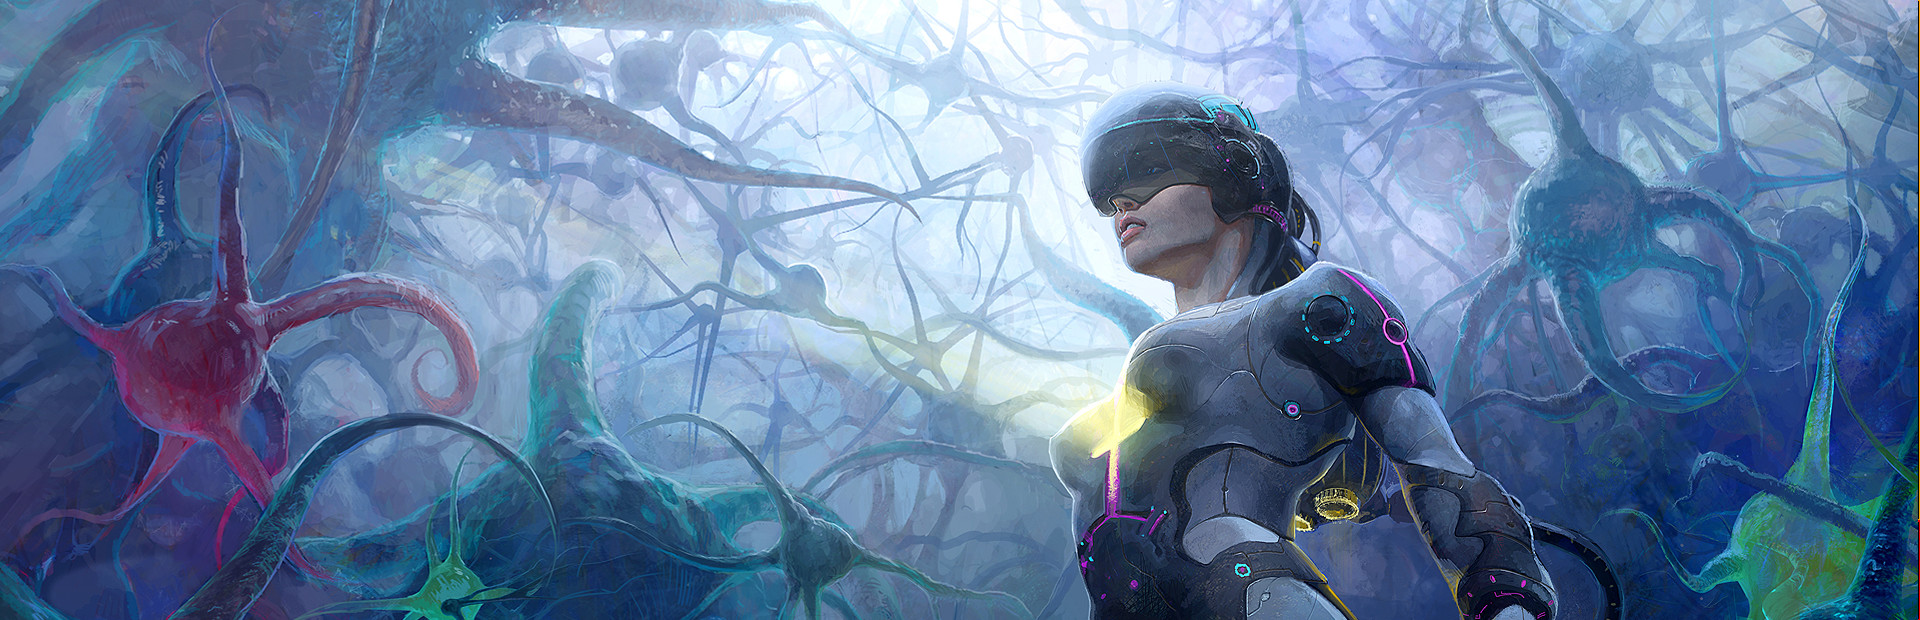 InMind VR cover image